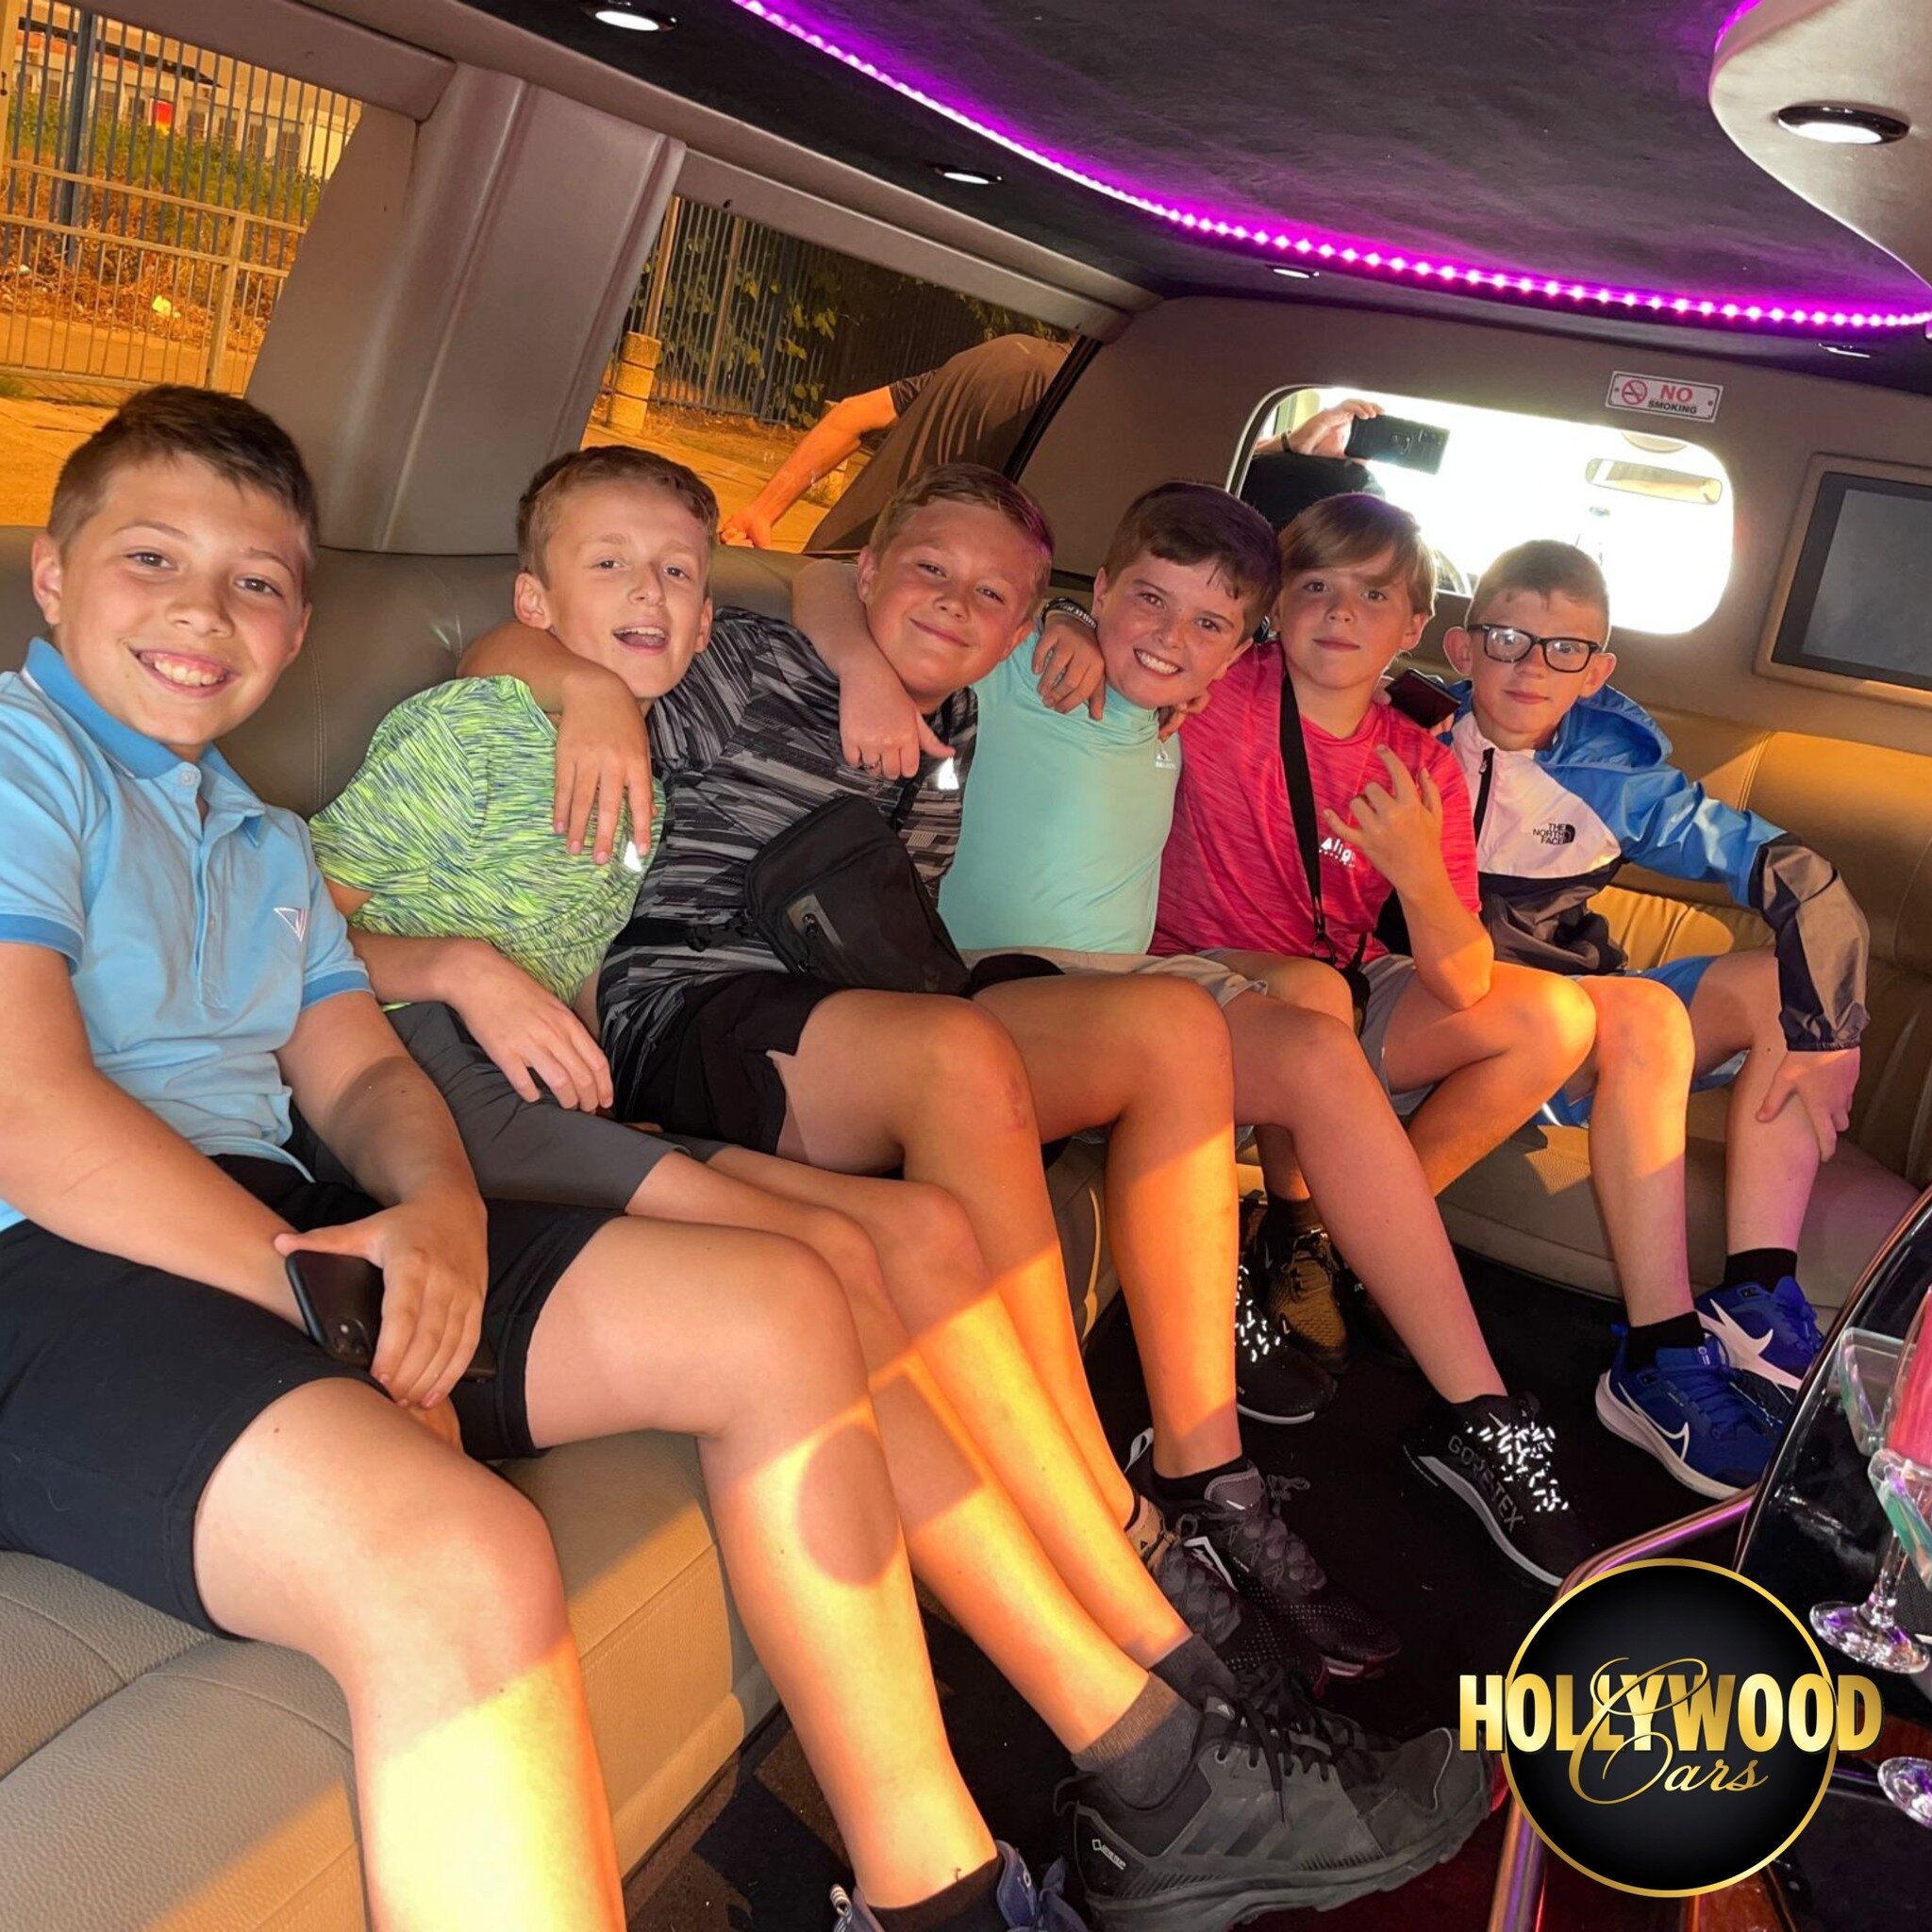 The boys travelling in style in our limousine! ✨✨✨
Why not send us an enquiry now at www.hollywoodcars.co.uk?

#party #partybus #limo #limohire #LuxuryTravel
#liverpool #drinks #partytime #music #love #dj
#wedding #nightlife #photography #instagram #